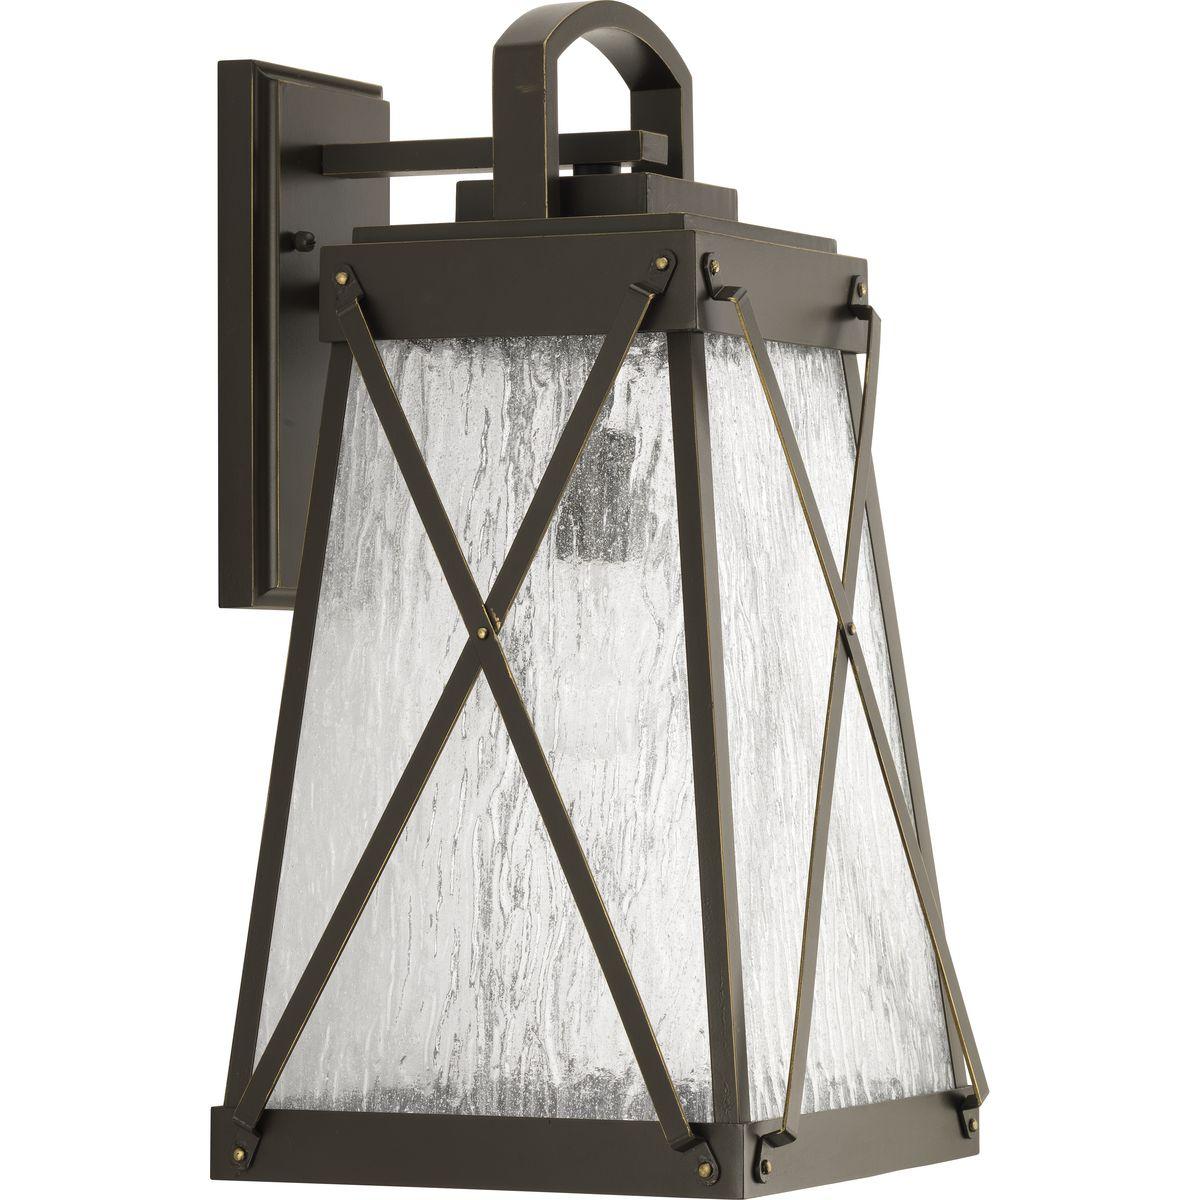 Hubbell P560033-020 A cottage-inspired outdoor large wall lantern with a tapered cage. Creighton features clear water glass clear and Antique Bronze finish. The frame's linear details are riveted to enhance mechanical detailing of the fixture. Wall, post and hanging lantern 